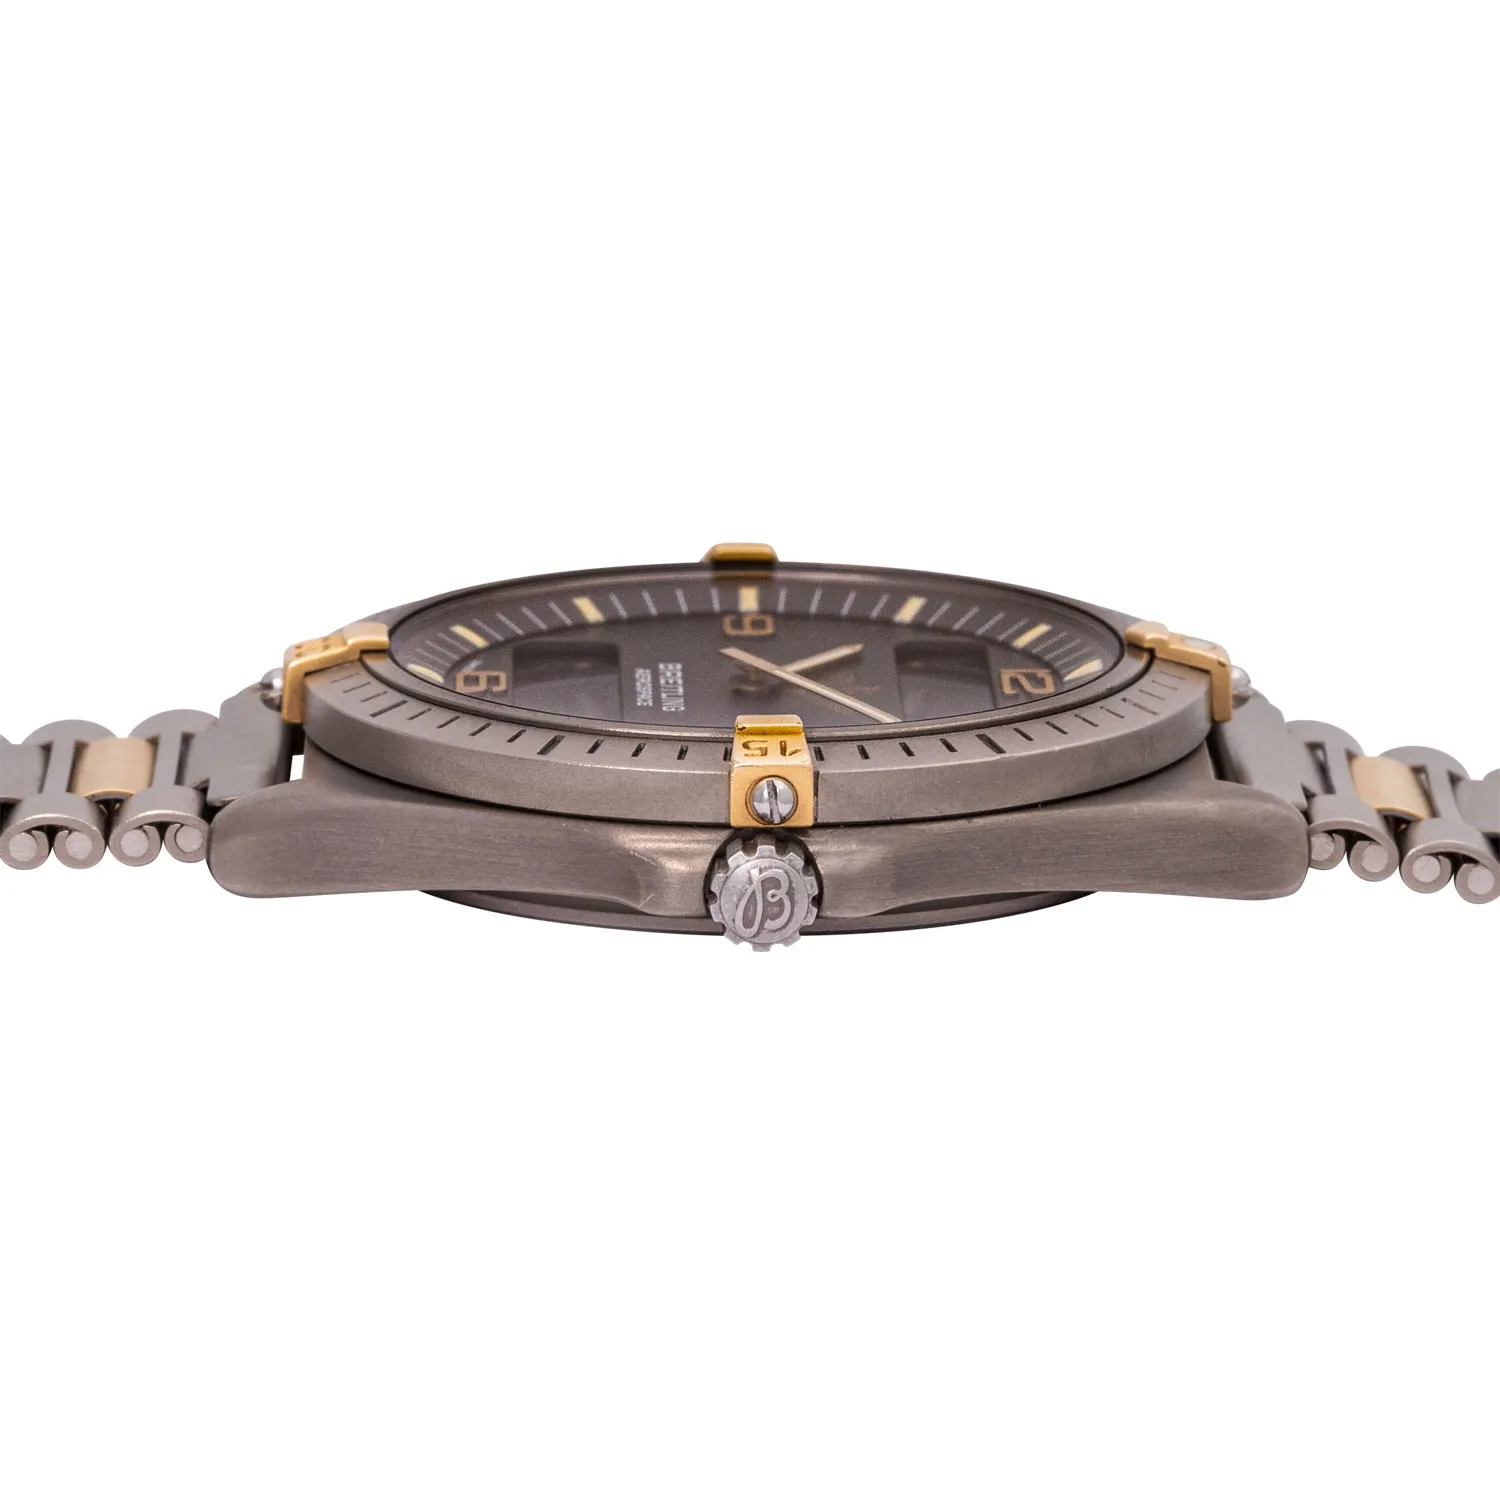 Breitling Aerospace F56061 40mm Titanium and gold-plated 4